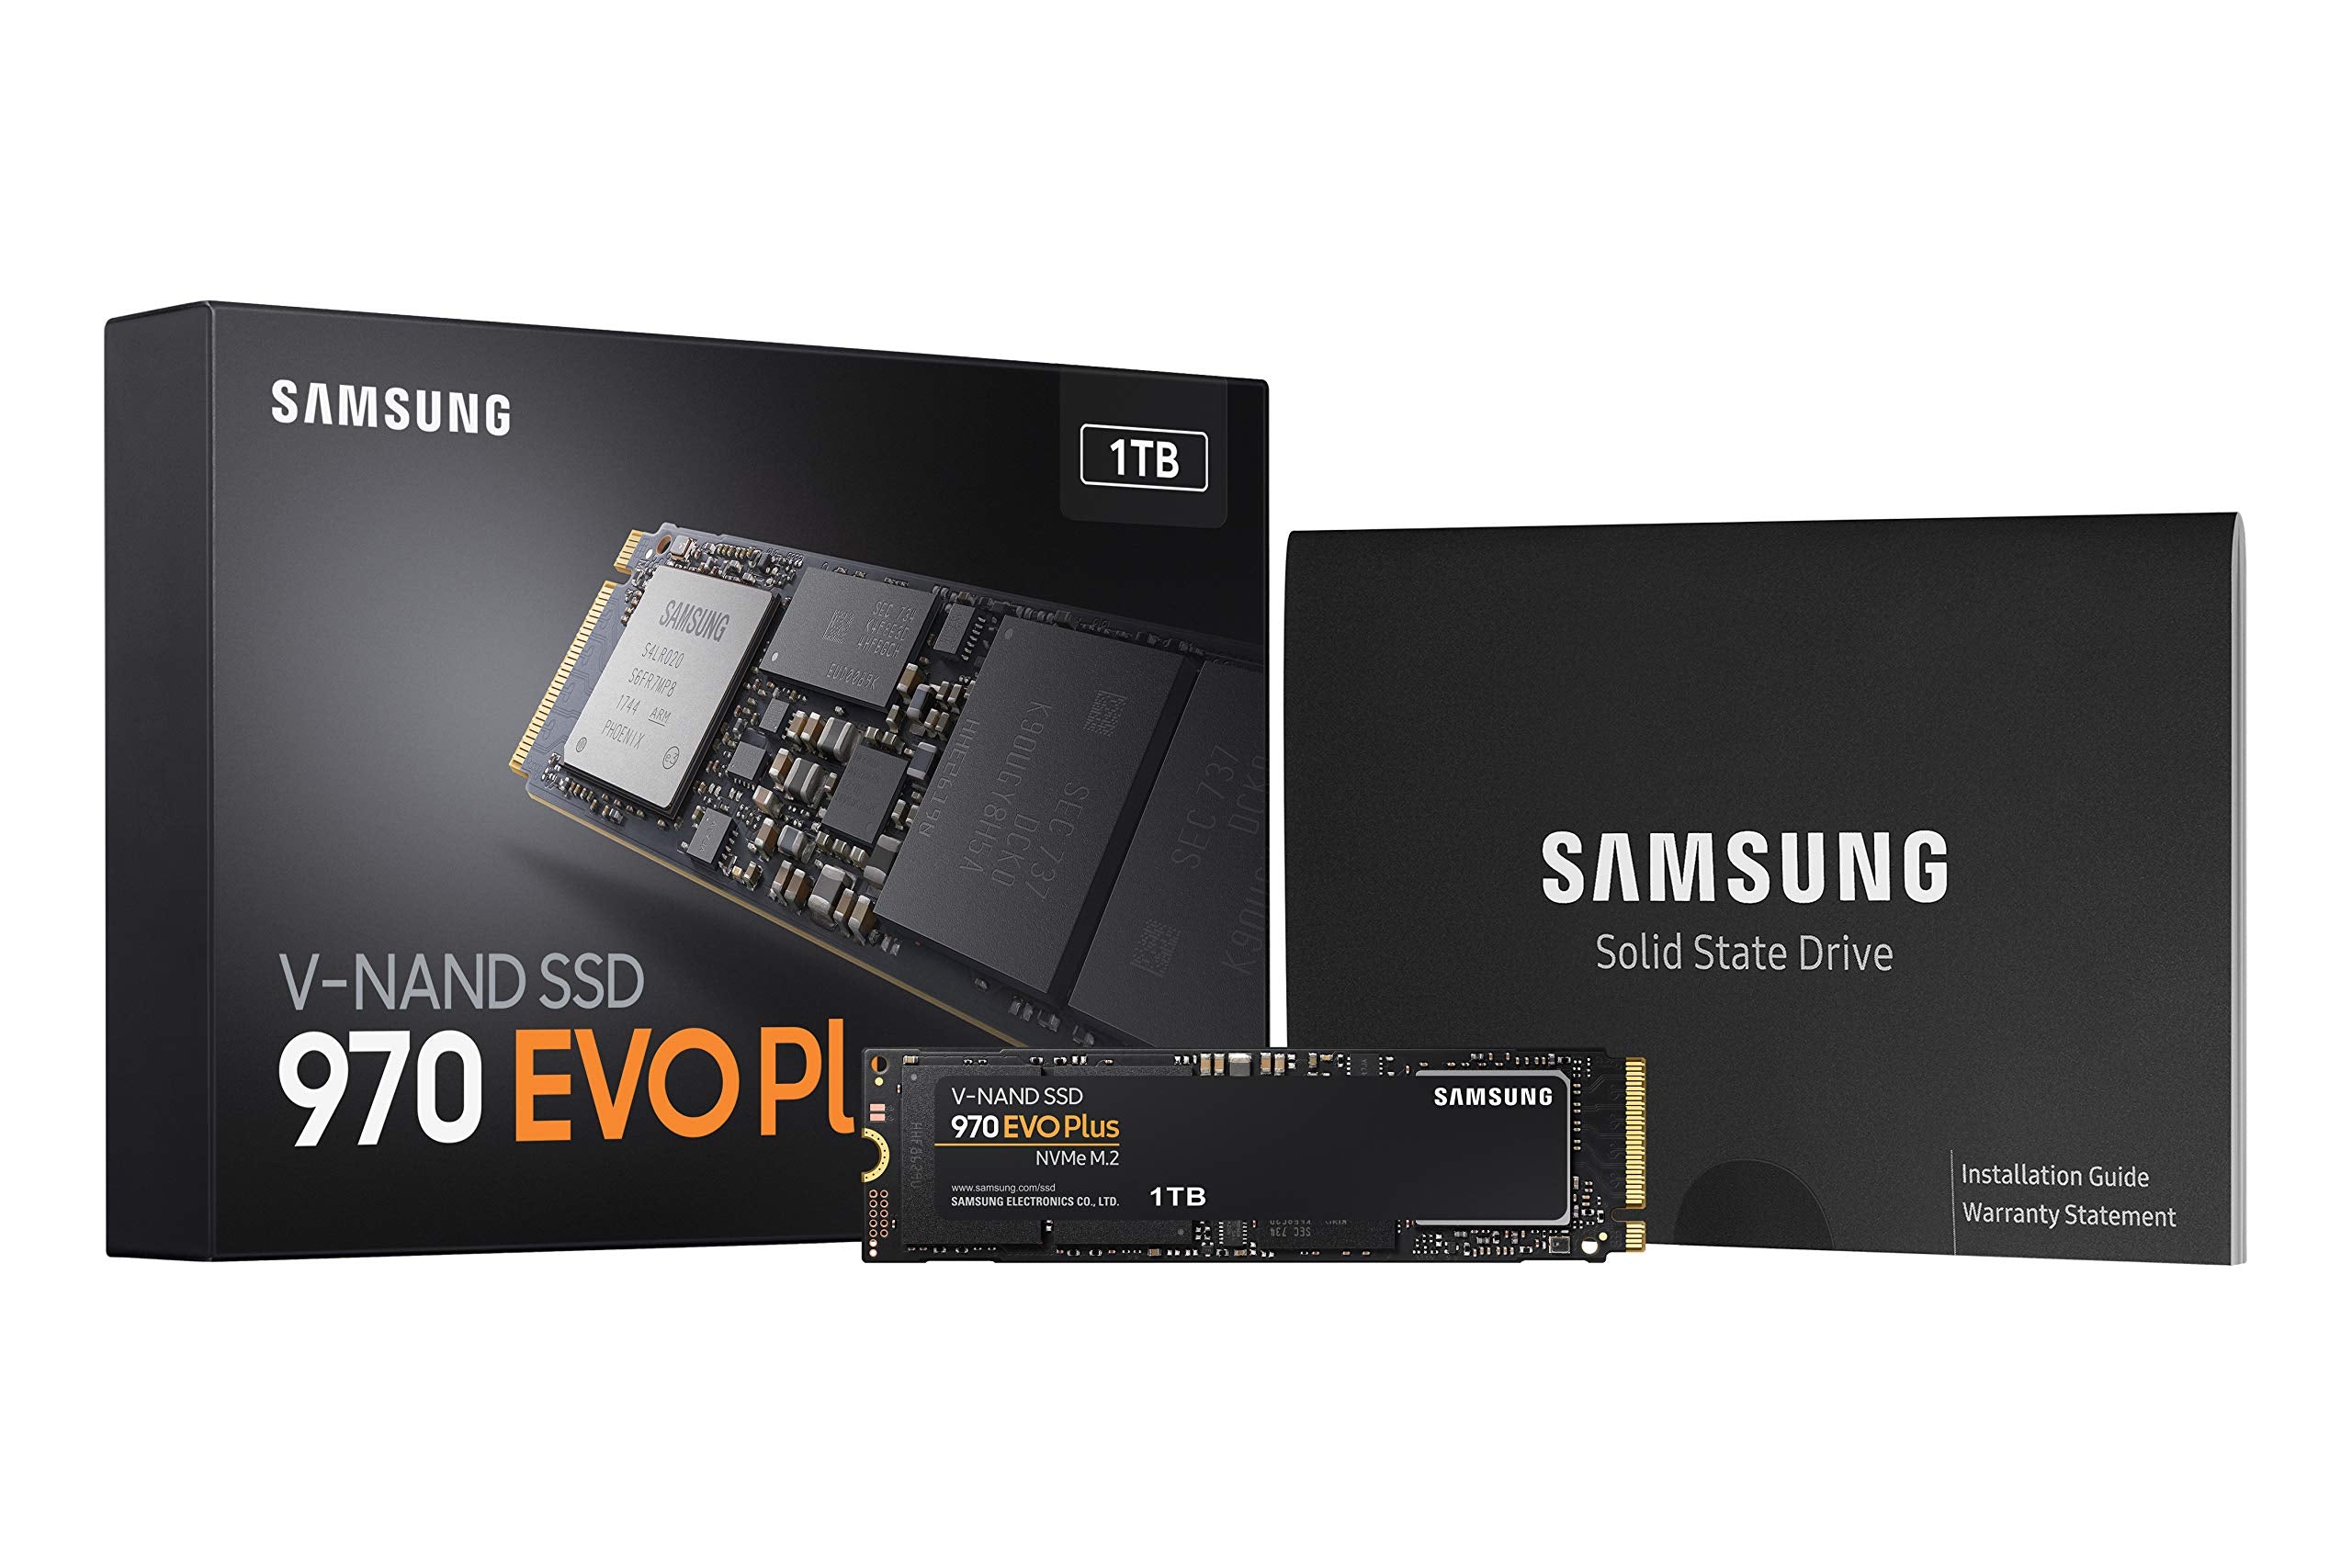 SAMSUNG 970 EVO Plus SSD 1TB NVMe M.2 Internal Solid State Drive w/ V-NAND Technology, Storage and Memory Expansion for Gaming, Graphics w/ Heat Control, Max Speed, MZ-V7S1T0B/AM